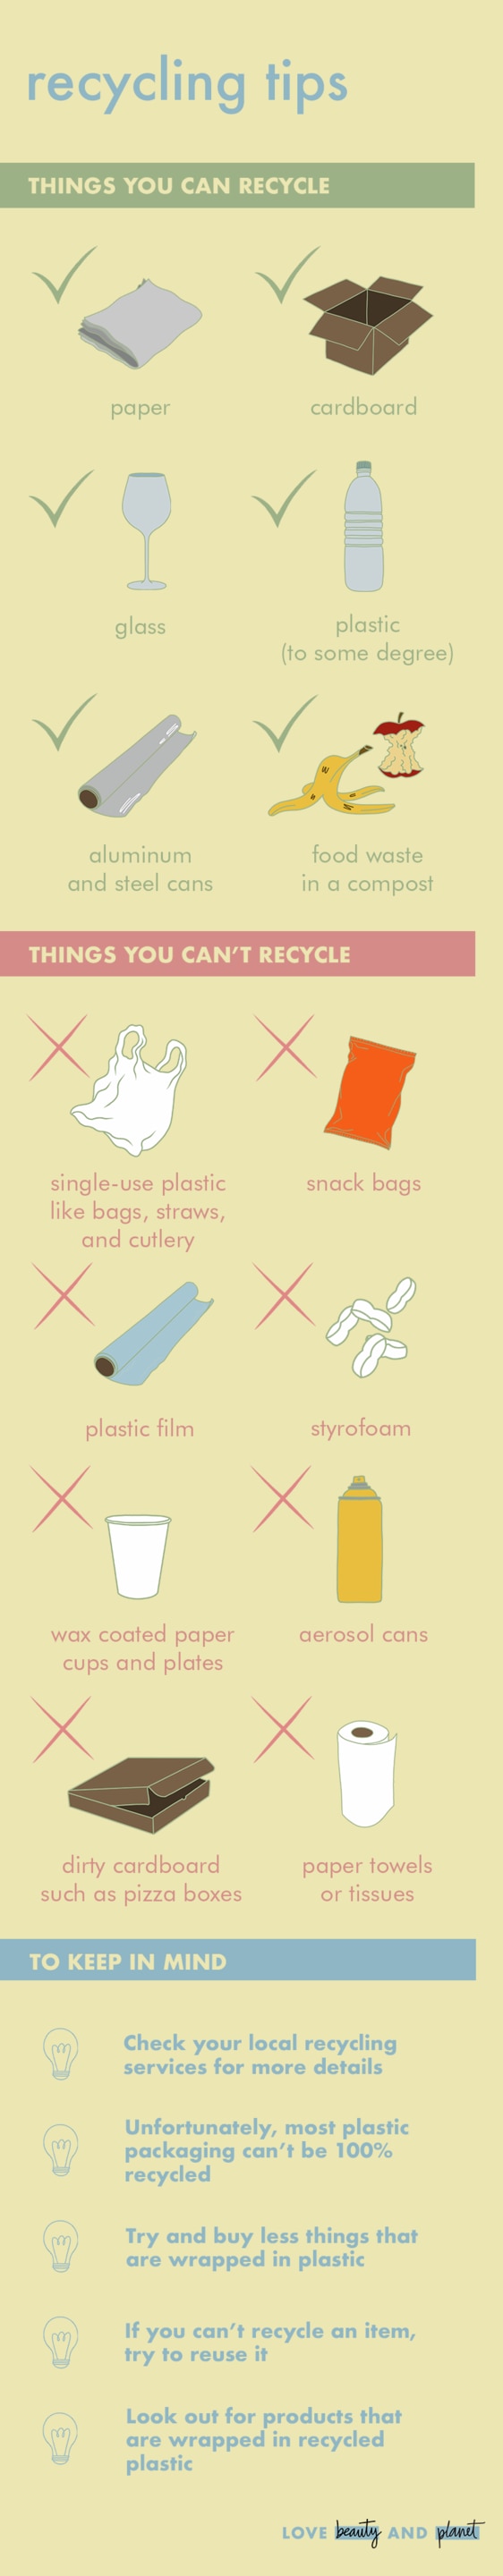 tips on recycling beauty packaging infographic